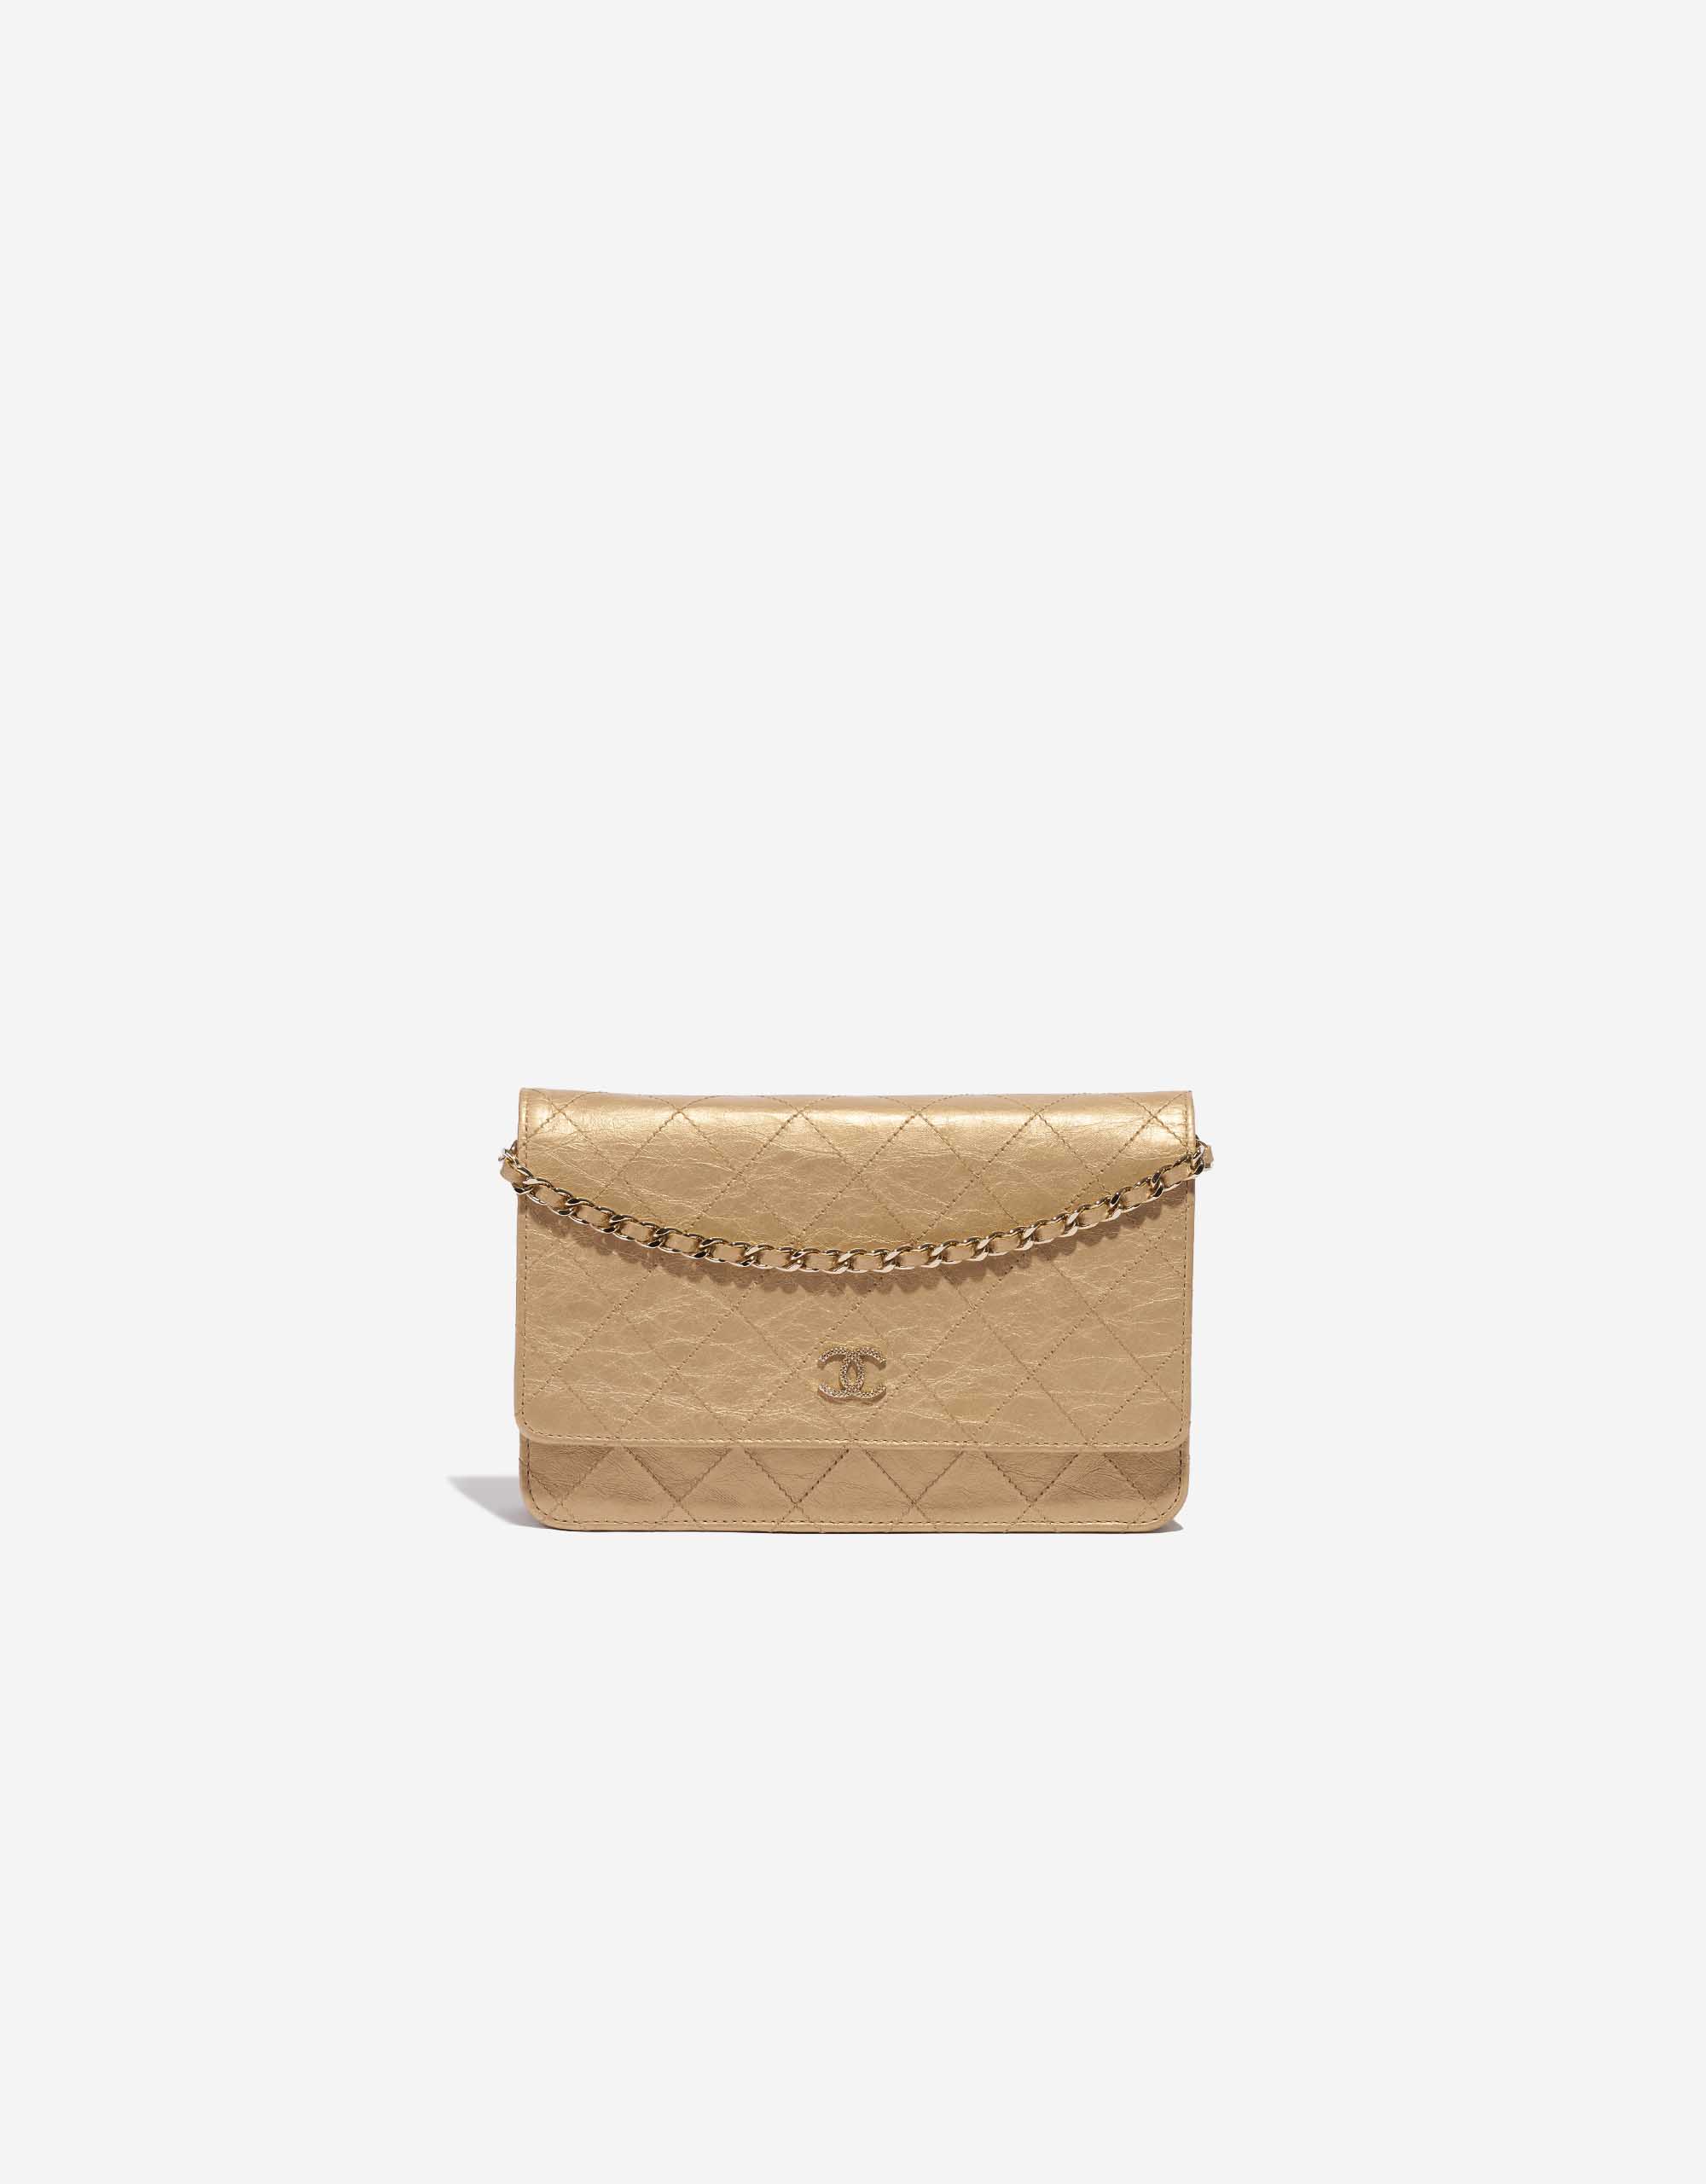 21S IRIDESCENT DARK BEIGE CAVIAR CLASSIC WALLET ON CHAIN LIGHT GOLD HA –  AYAINLOVE CURATED LUXURIES